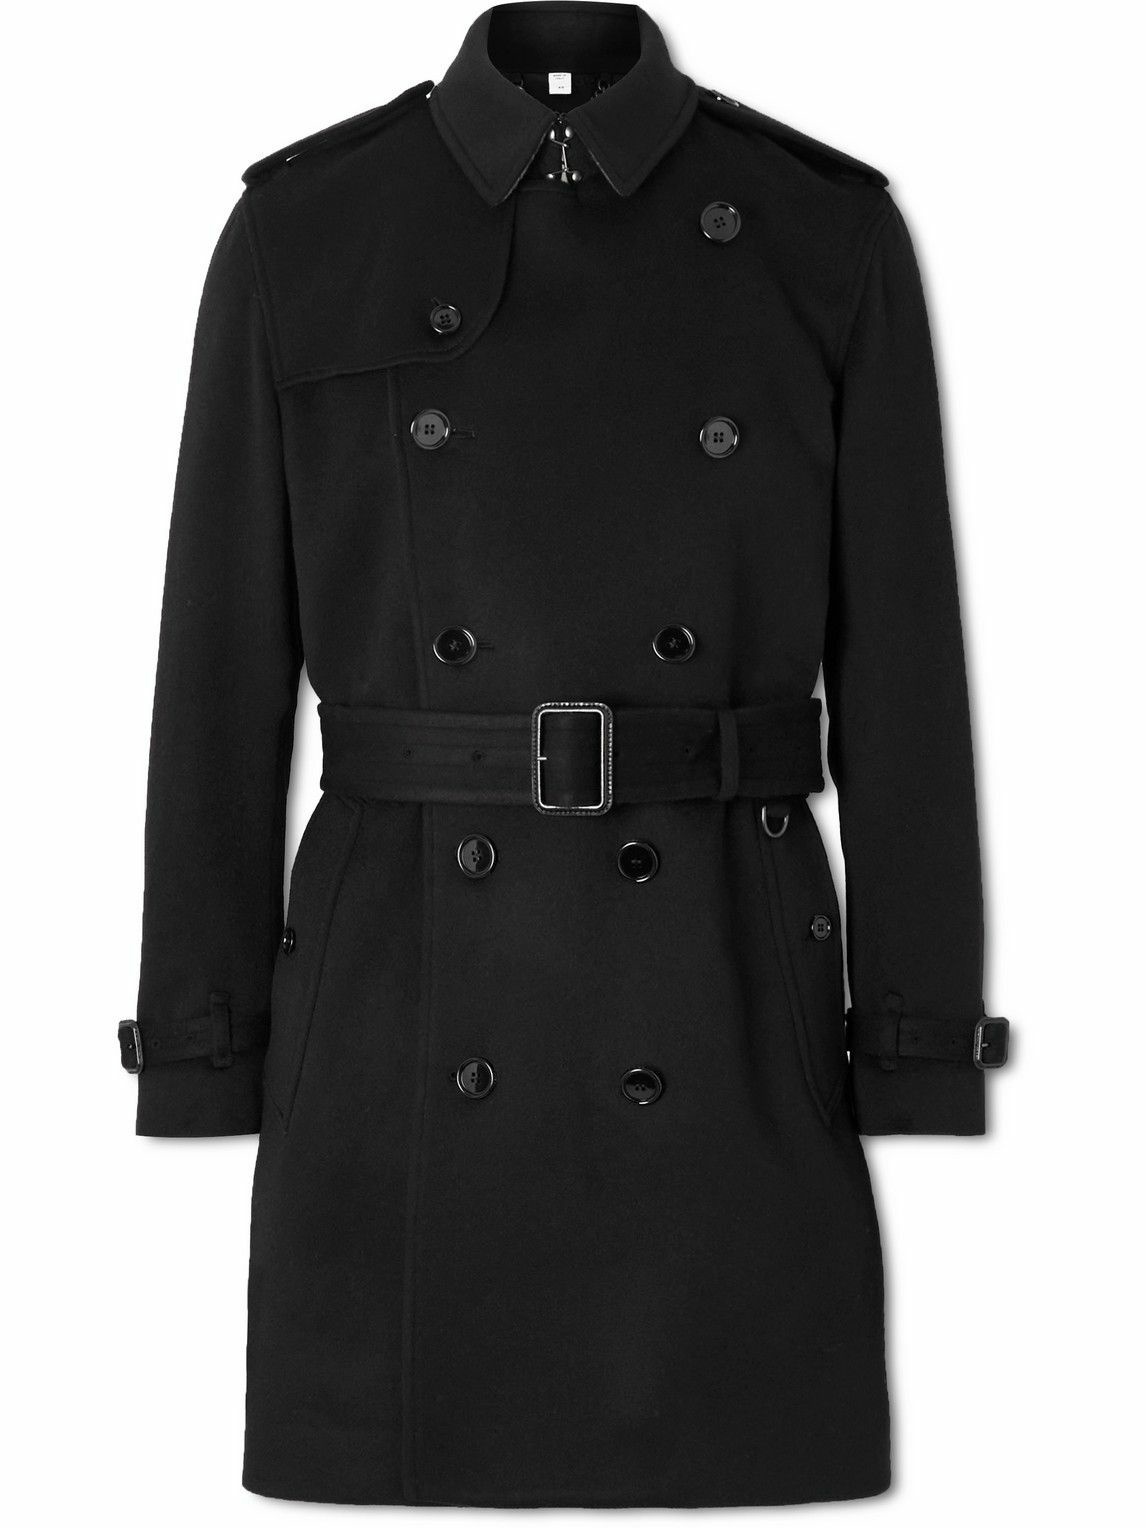 Burberry - Kensington Double-Breasted Cashmere Coat - Black Burberry